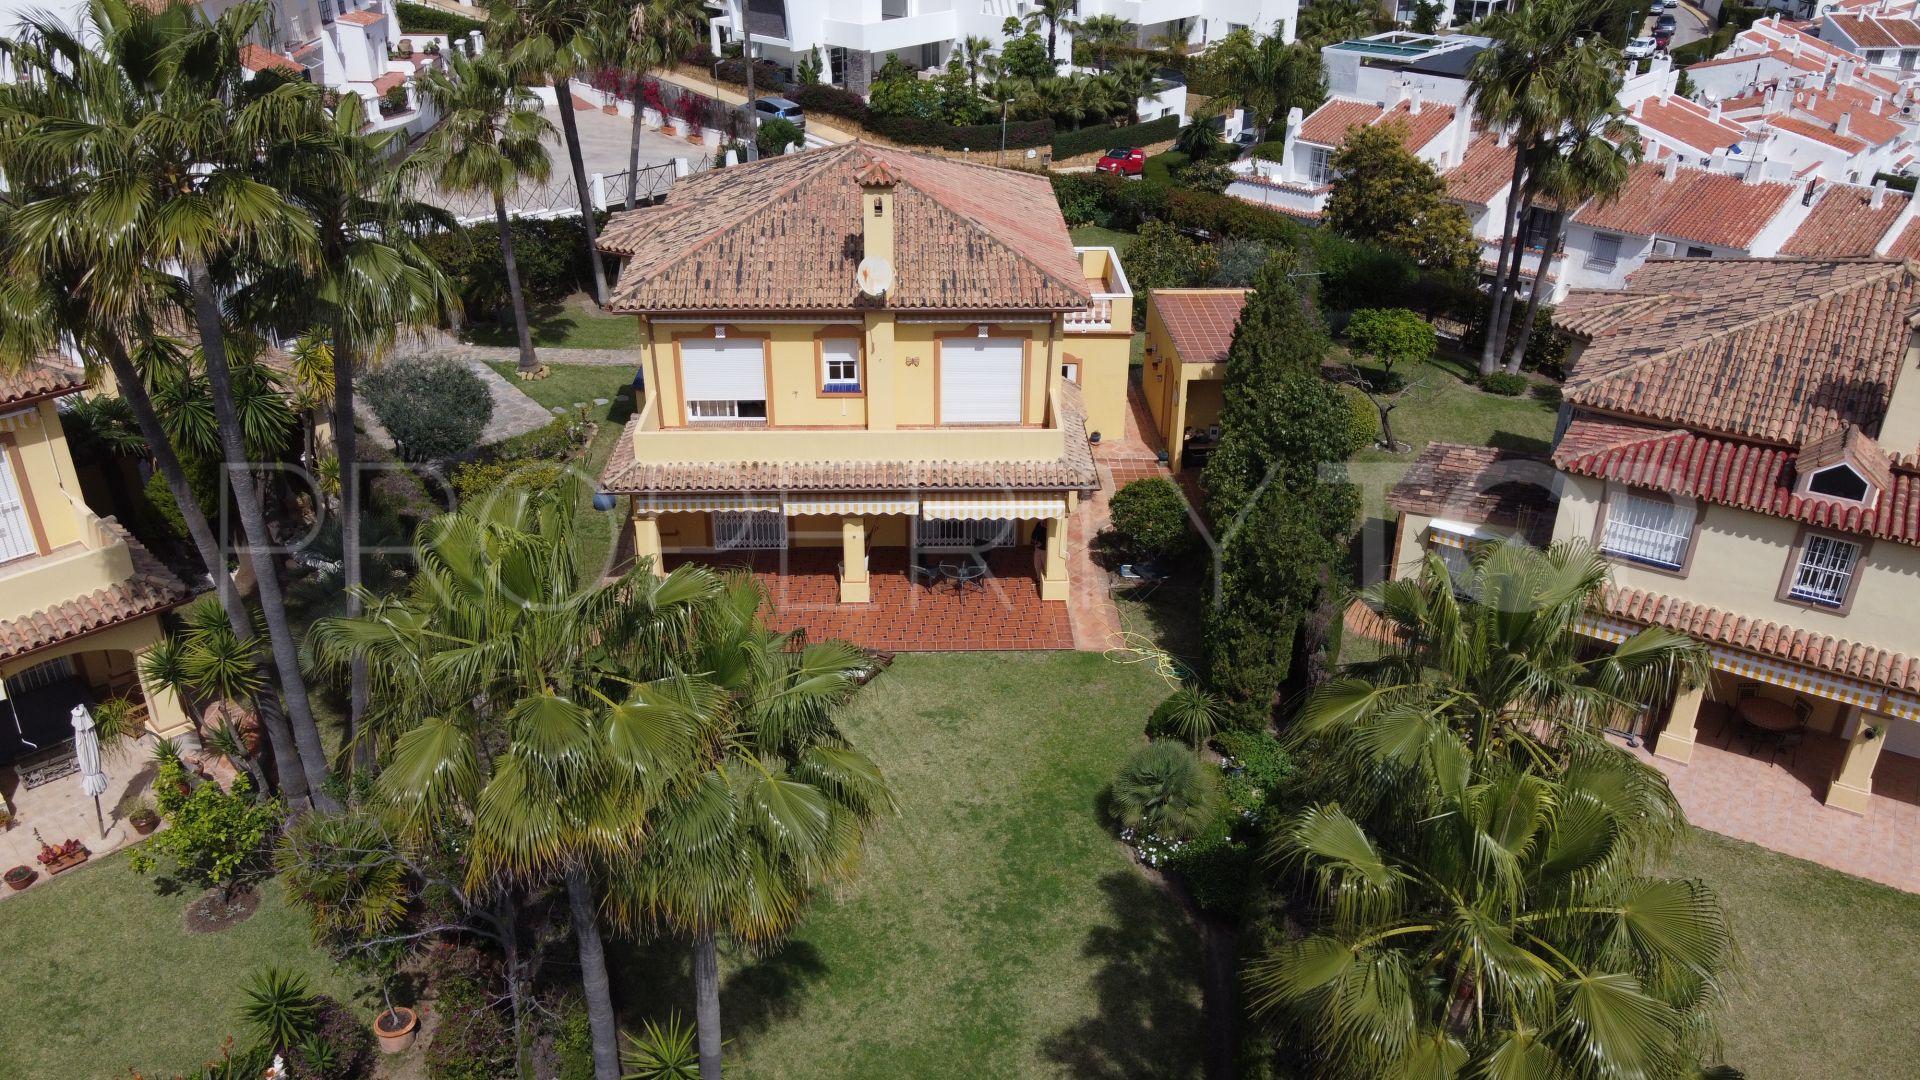 4 bedrooms house in Monte Biarritz for sale